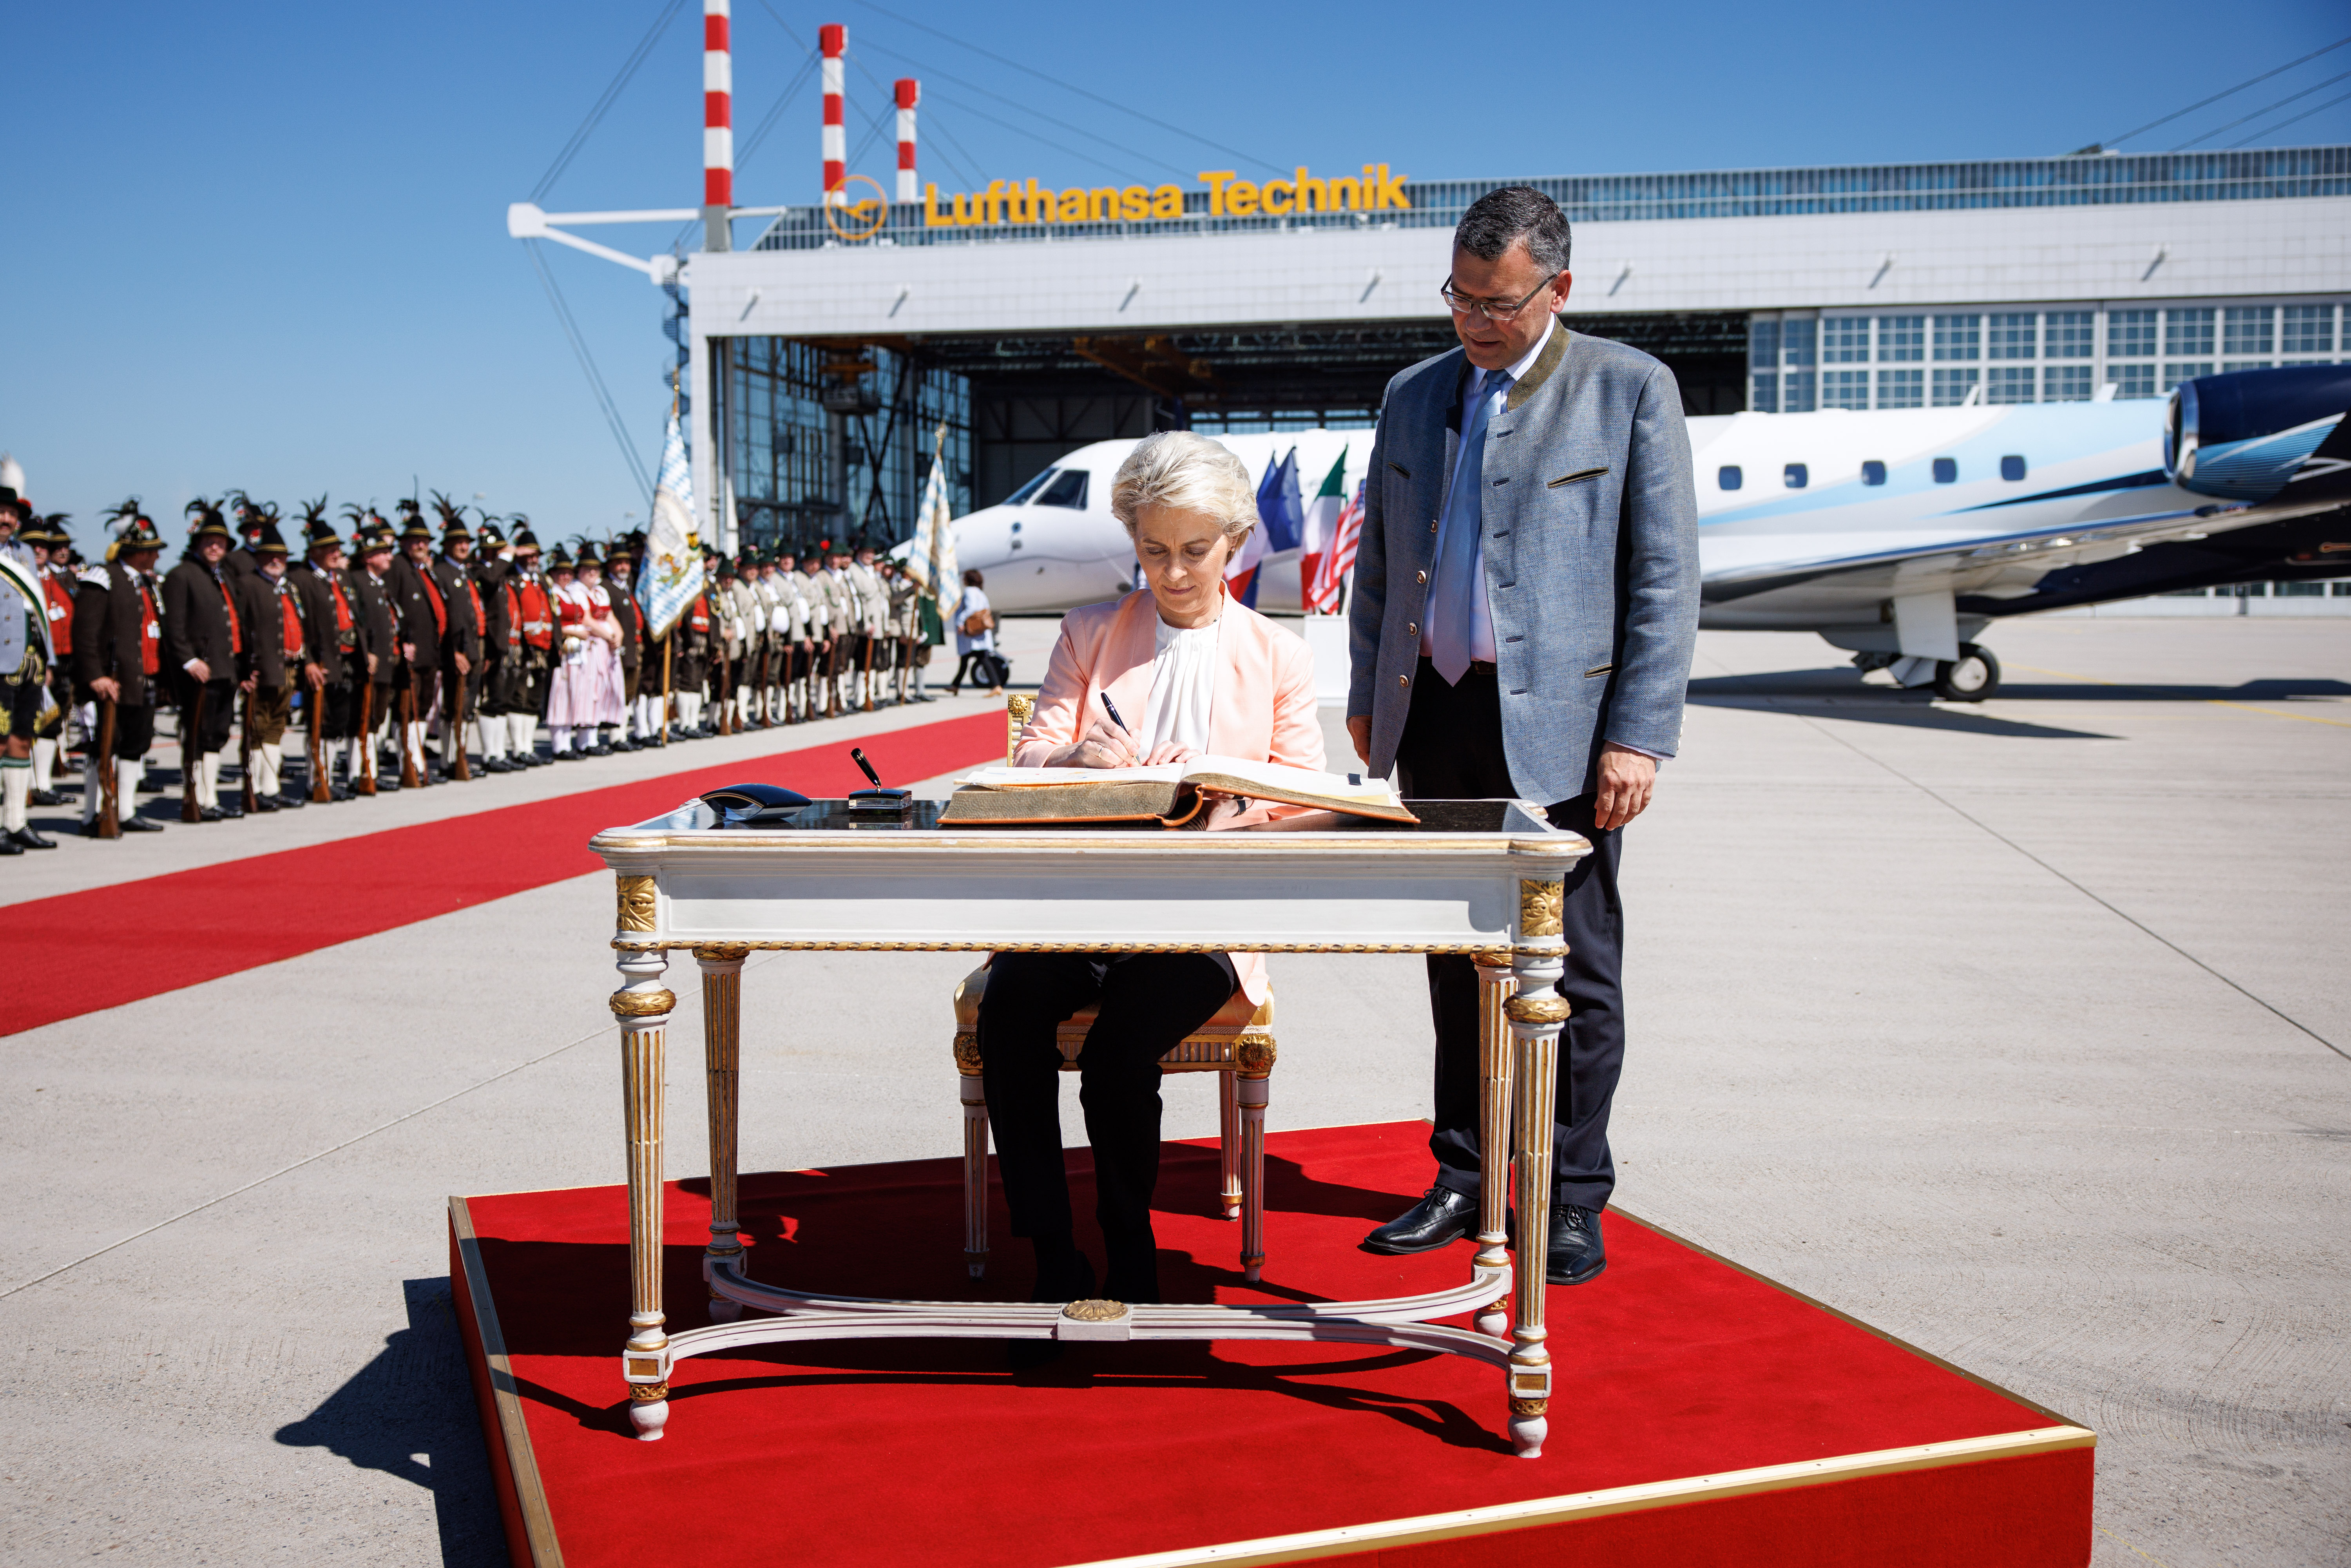 Arrival of Ursula von der Leyen (President of the European Commission), signing of the golden visitors’ book of the Government of the Free State of Bavaria.